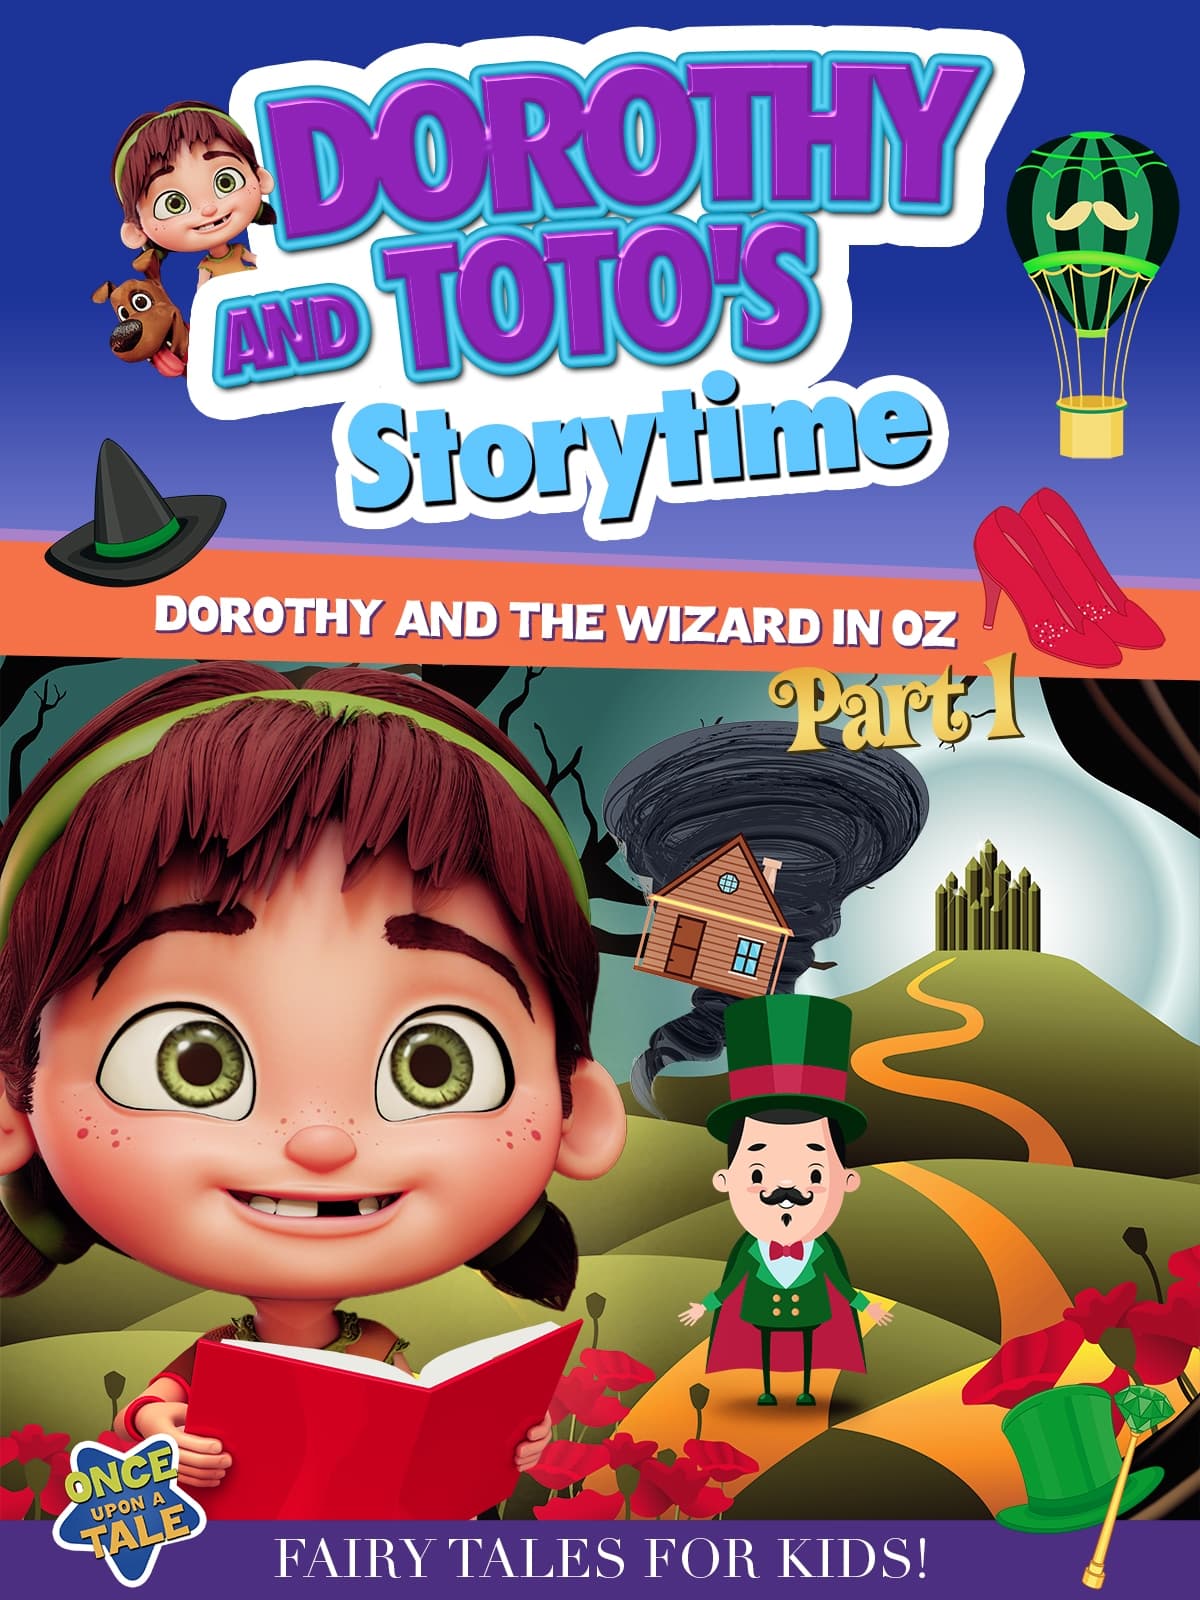 Dorothy And Toto's Storytime: Dorothy And The Wizard in Oz Part 1